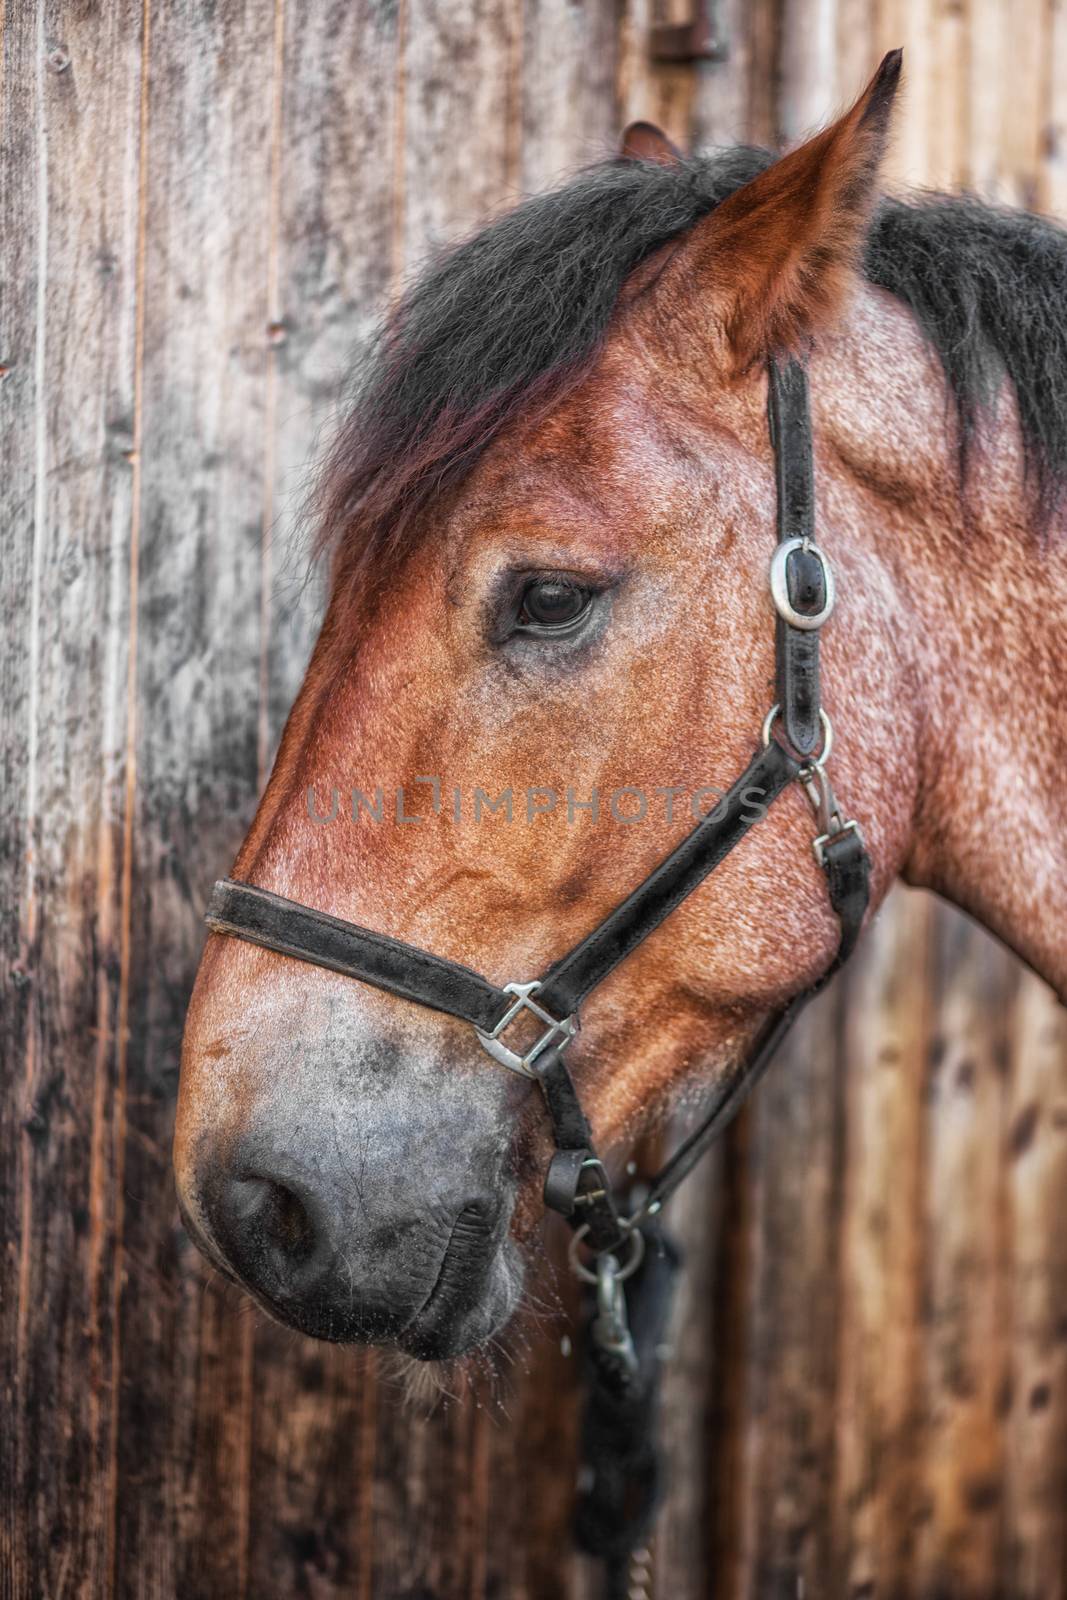 Head shot of a horse against a wooden background